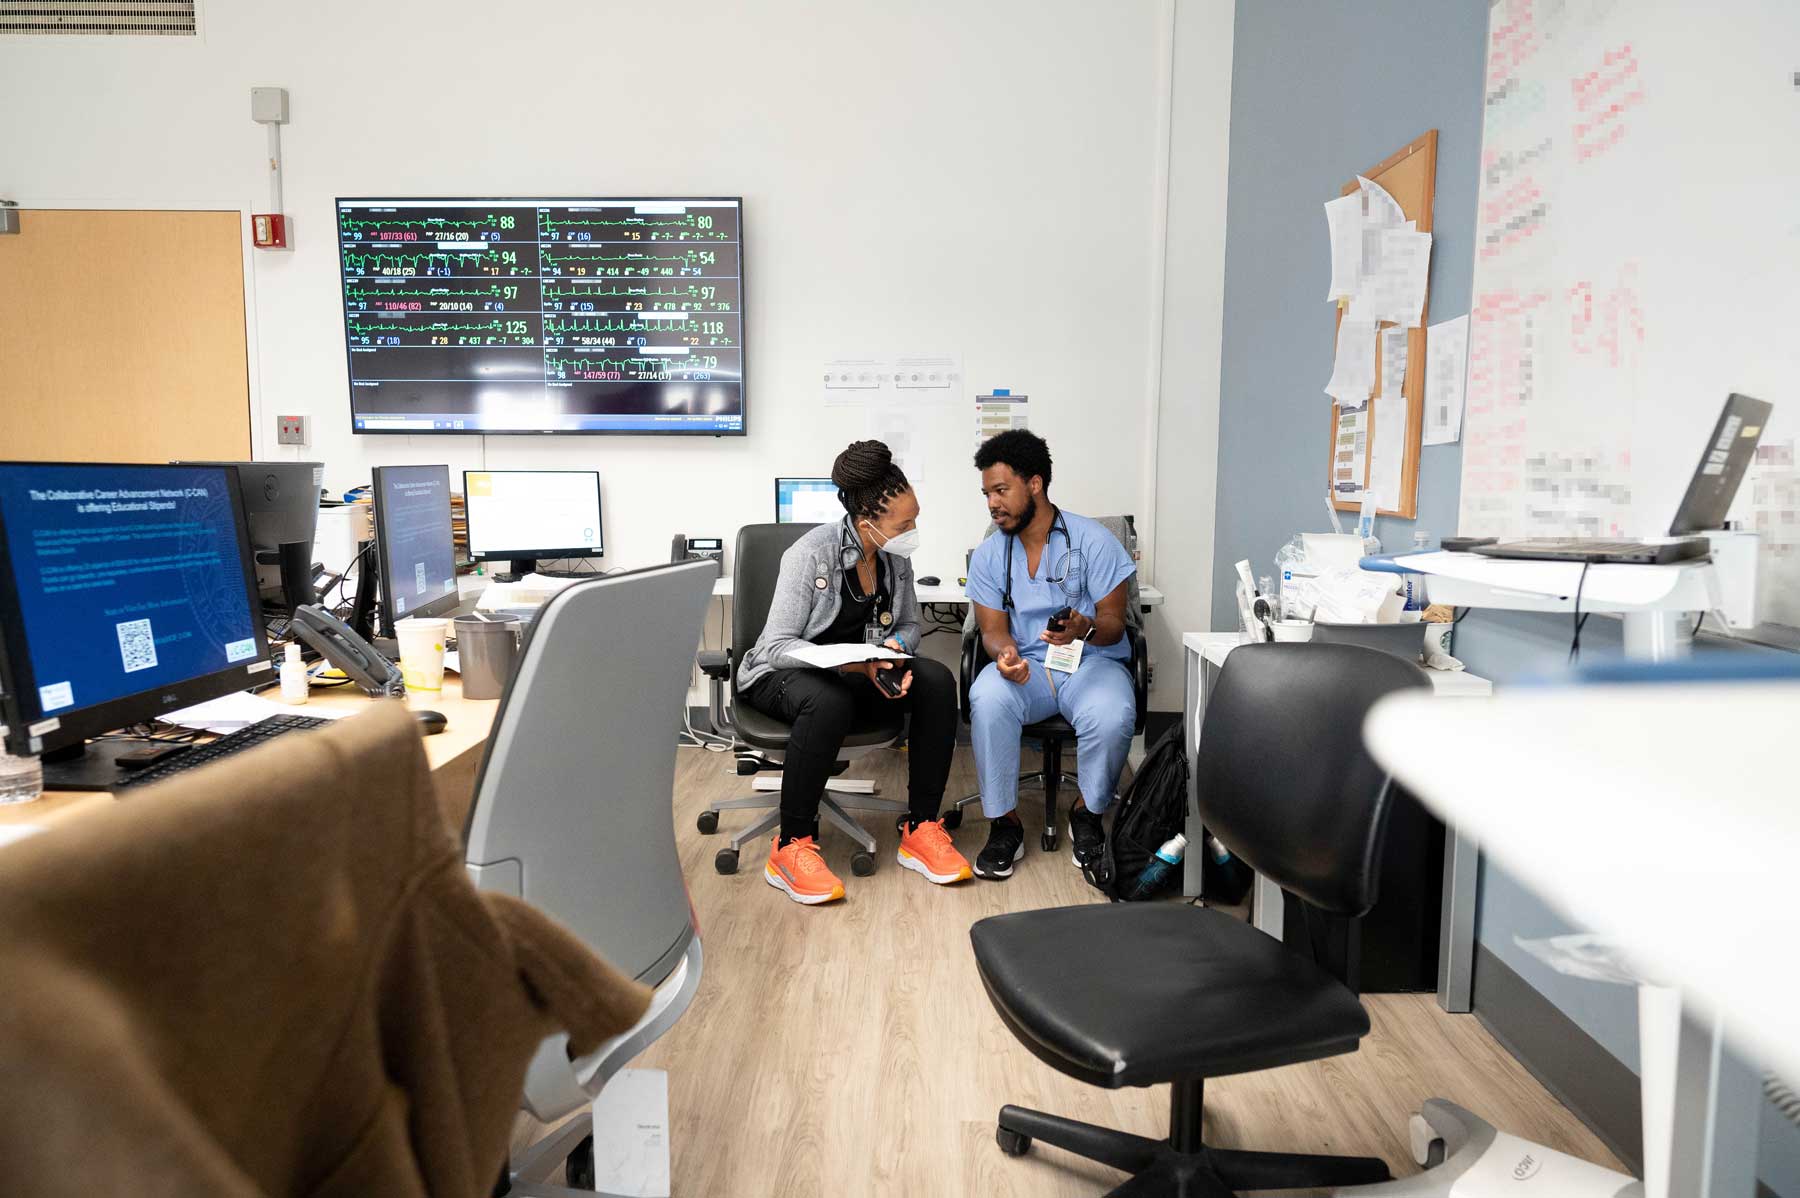 Two Black medical residents named Kelechi and Chris sit and discuss patients in a resident working area. They are surrounded by computers, chairs, and patient information on whiteboards.